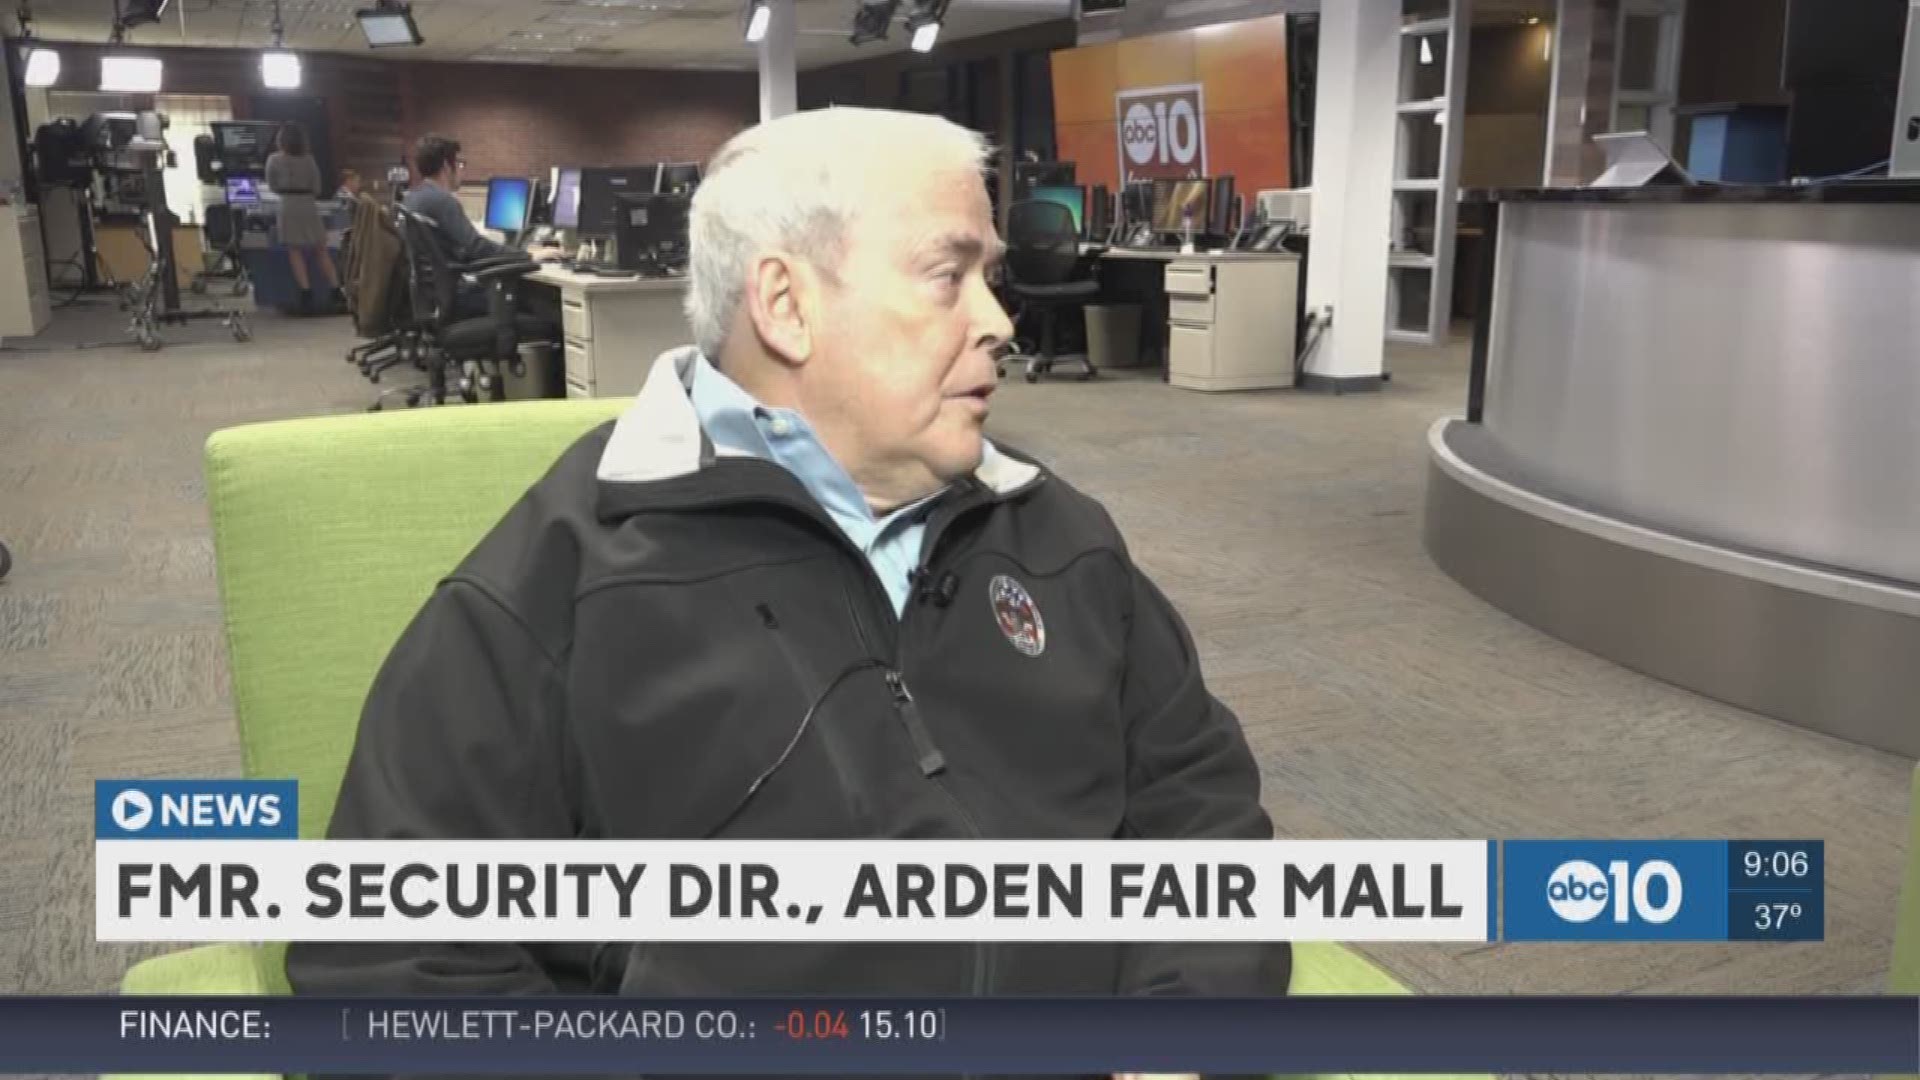 Steve Reed, the former security director of Arden Fair Mall, talks about his policies and what he may have done differently to combat recent accusations of racial profiling.